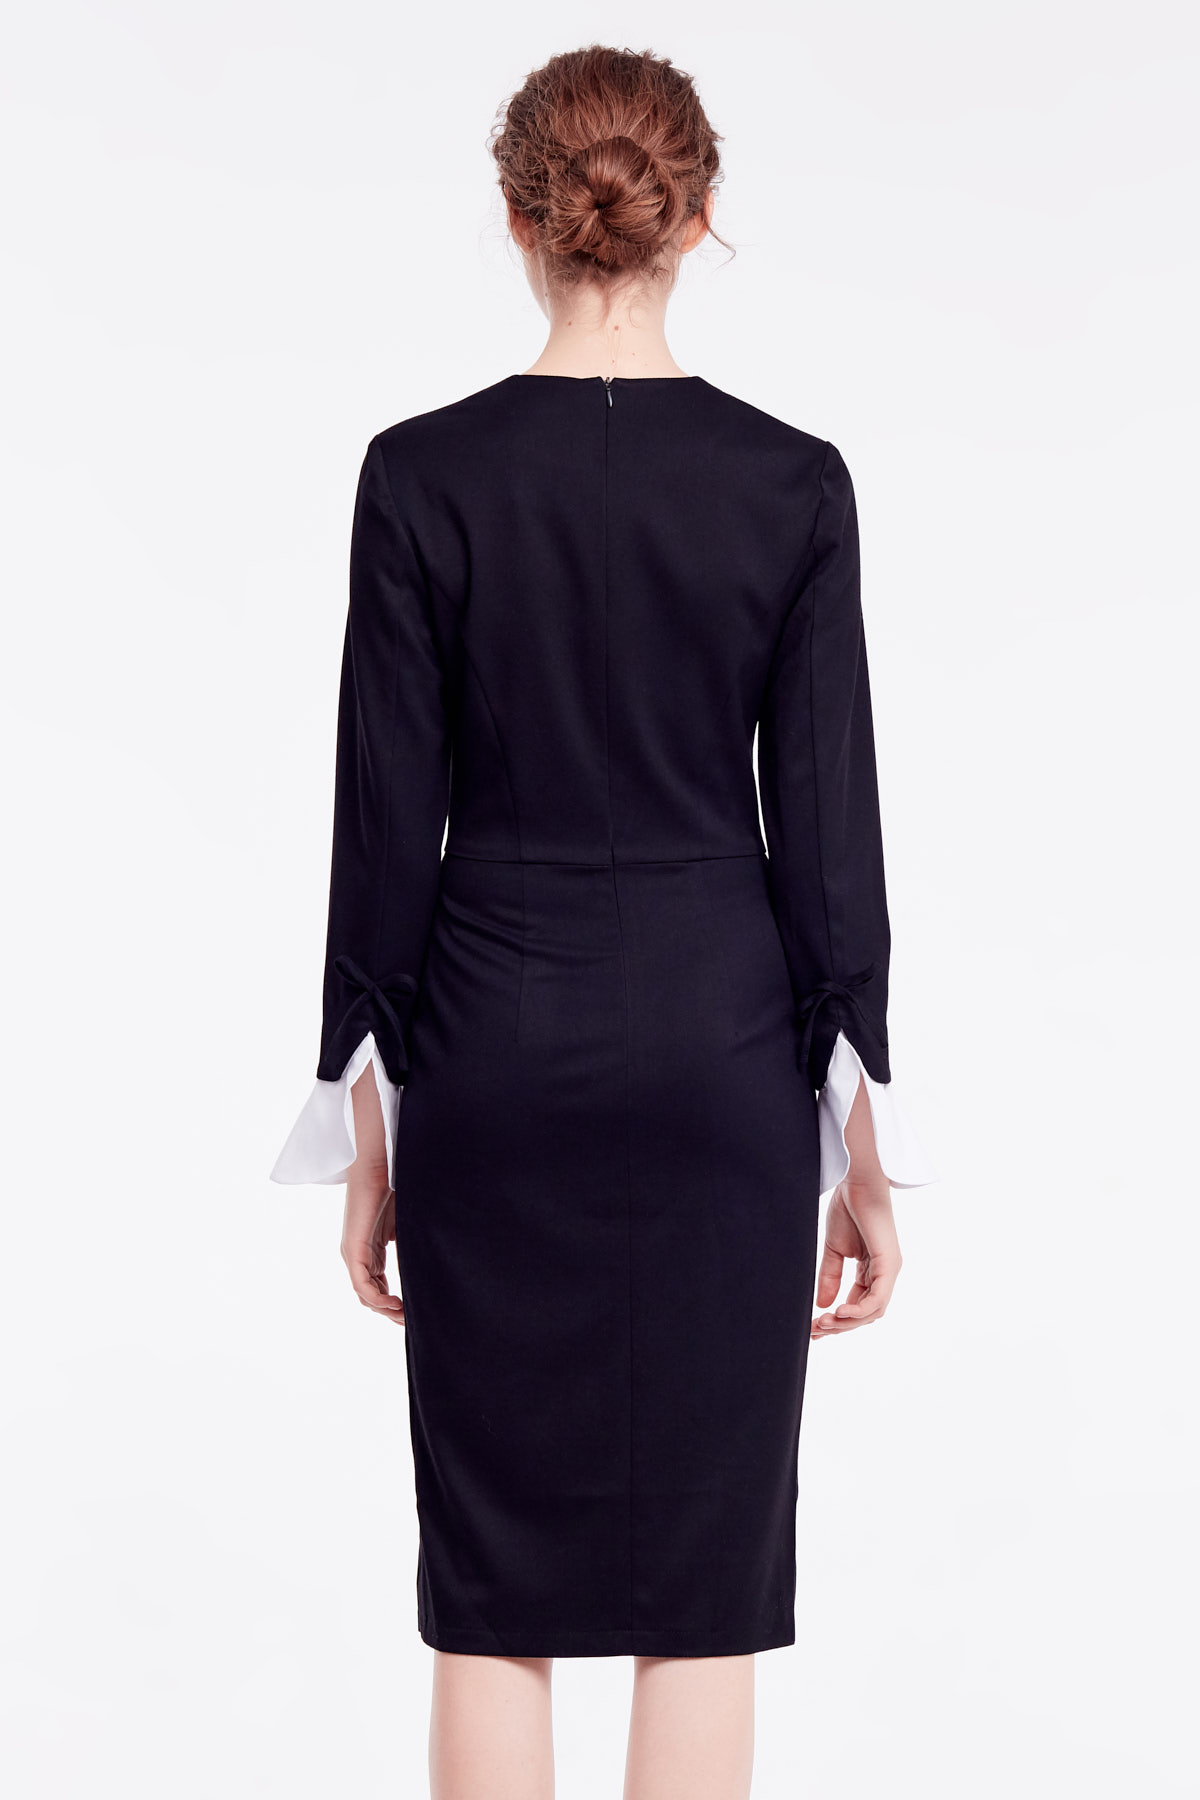 Black column dress with white cuffs on sleeves, photo 3